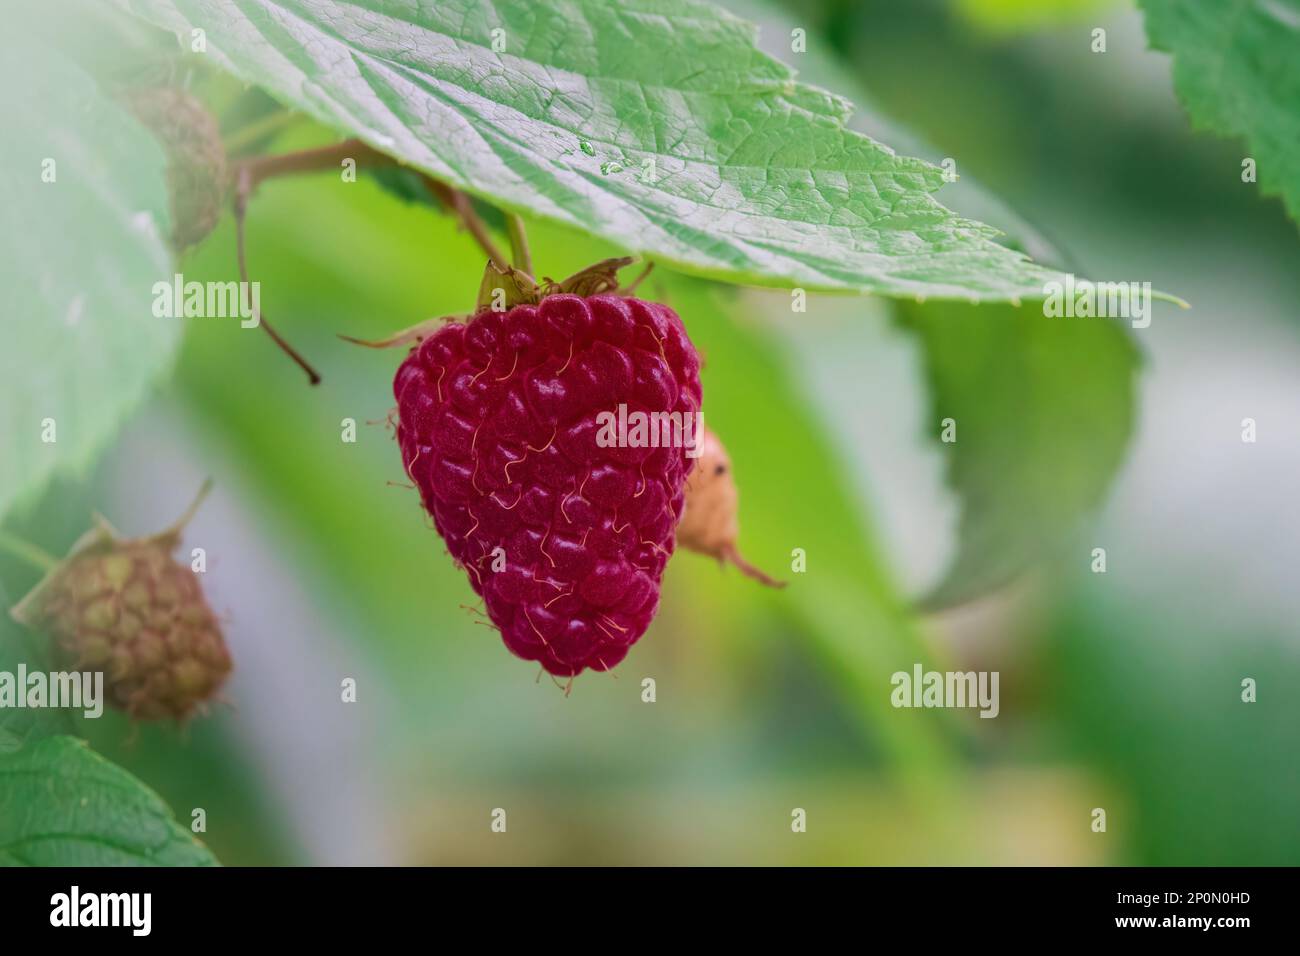 Big ripe raspberry on the branch. Delicious garden berry. Selective focus on berry Stock Photo